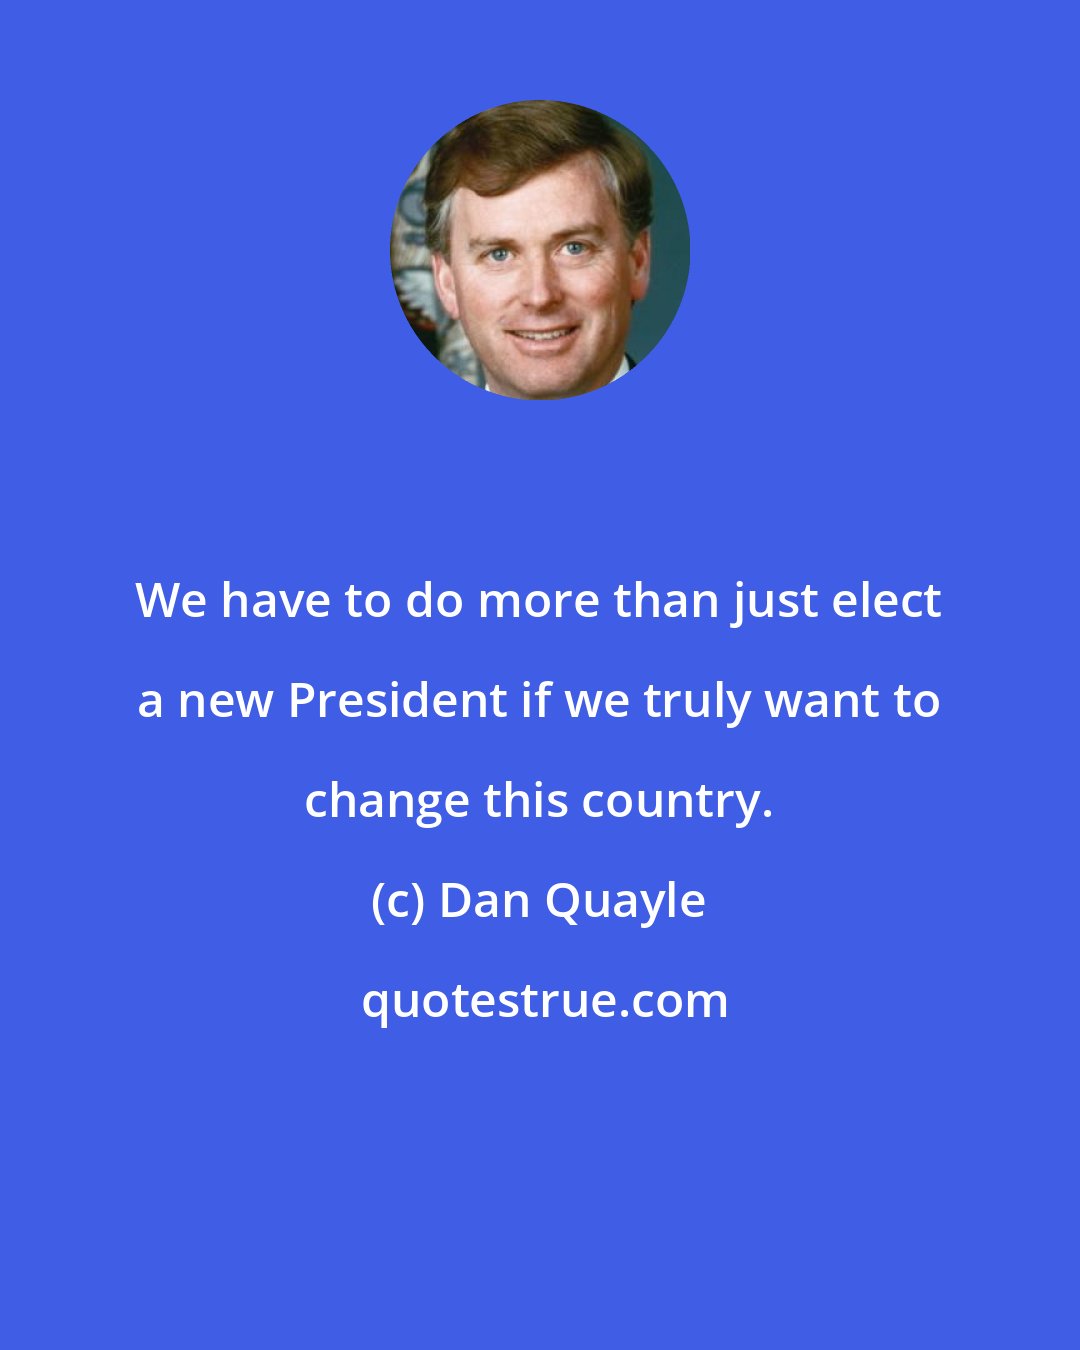 Dan Quayle: We have to do more than just elect a new President if we truly want to change this country.